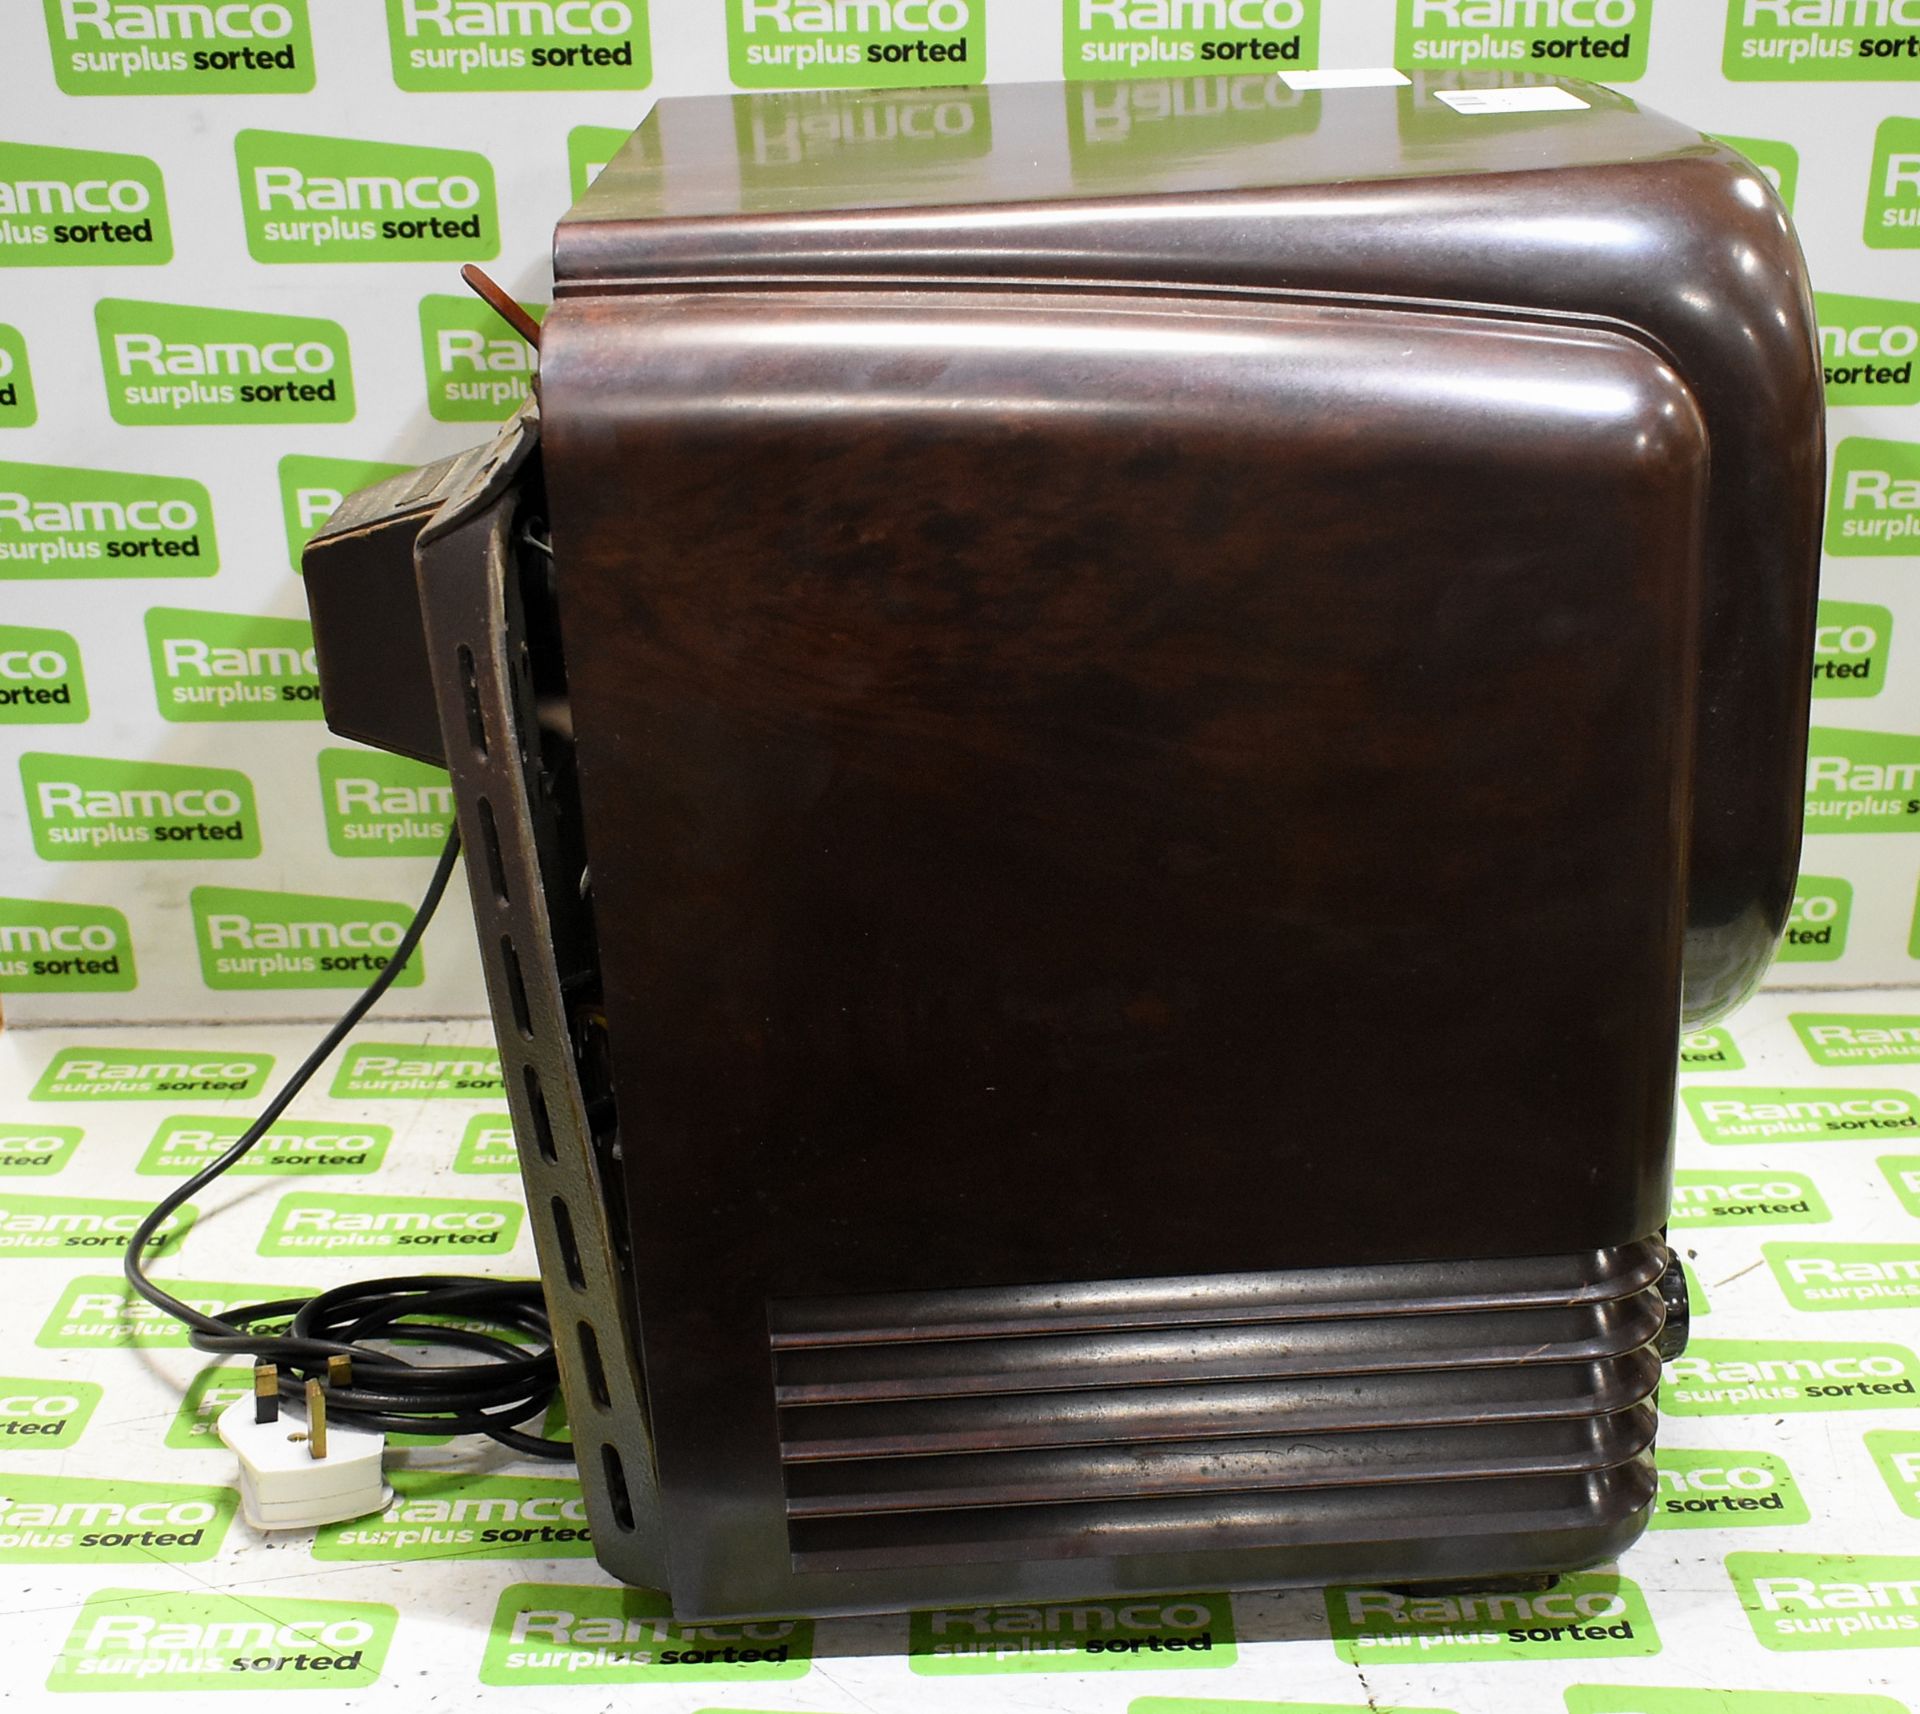 Bush TV 12 AM - 9 inch bakelite television with aerial - Image 4 of 10